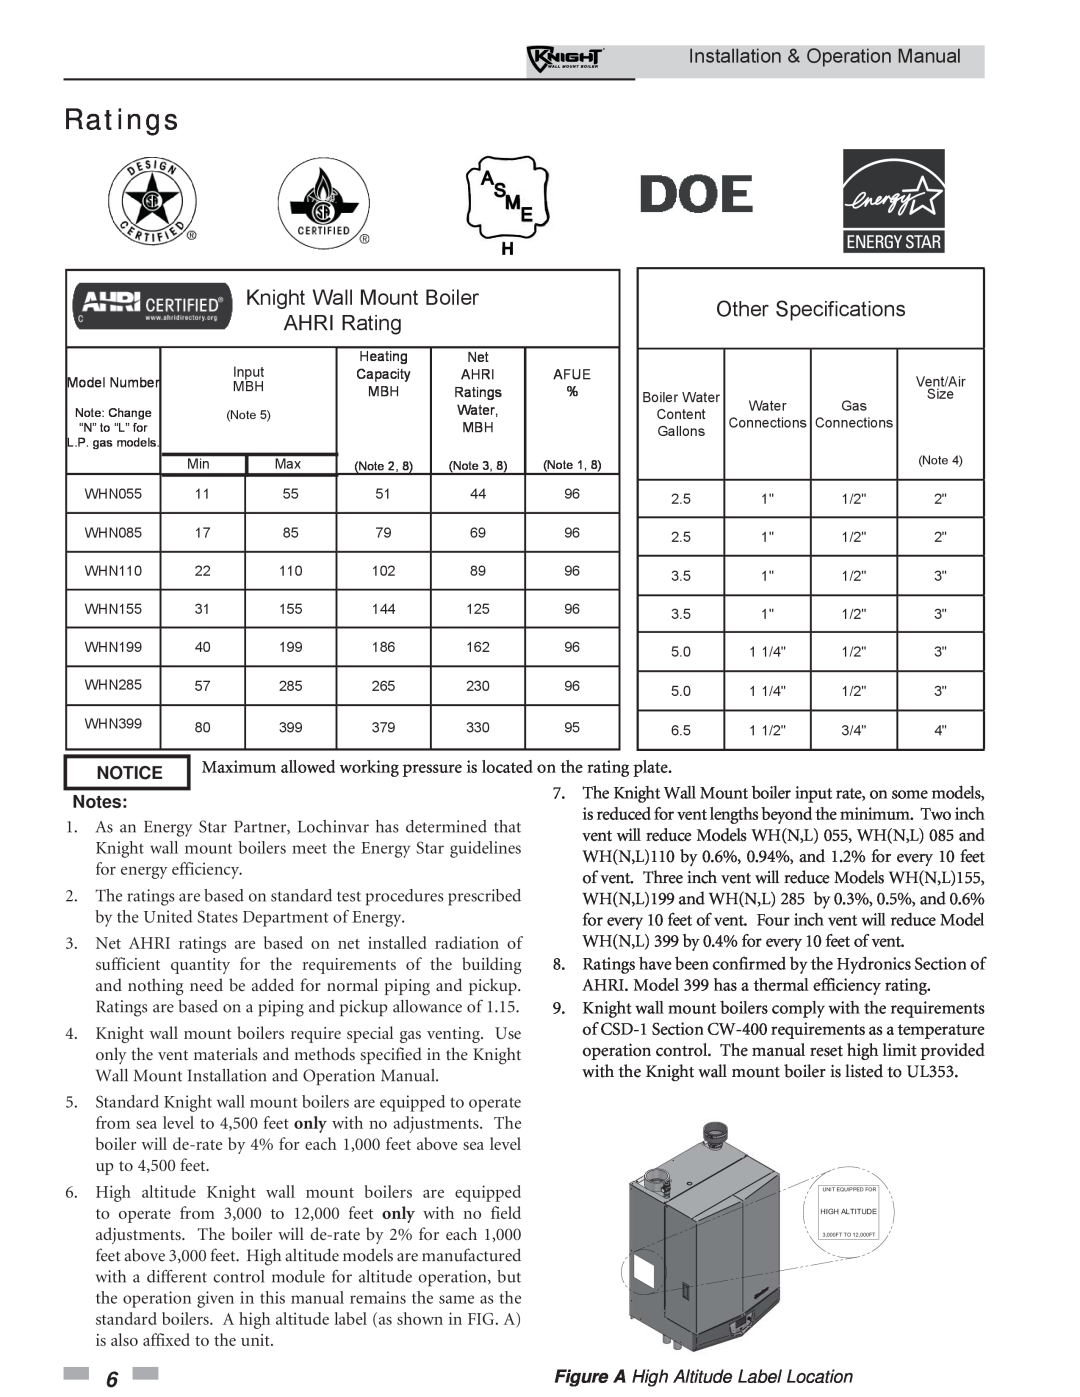 Lochinvar WH 55-399 operation manual Ratings, Figure A High Altitude Label Location, Knight Wall Mount Boiler AHRI Rating 